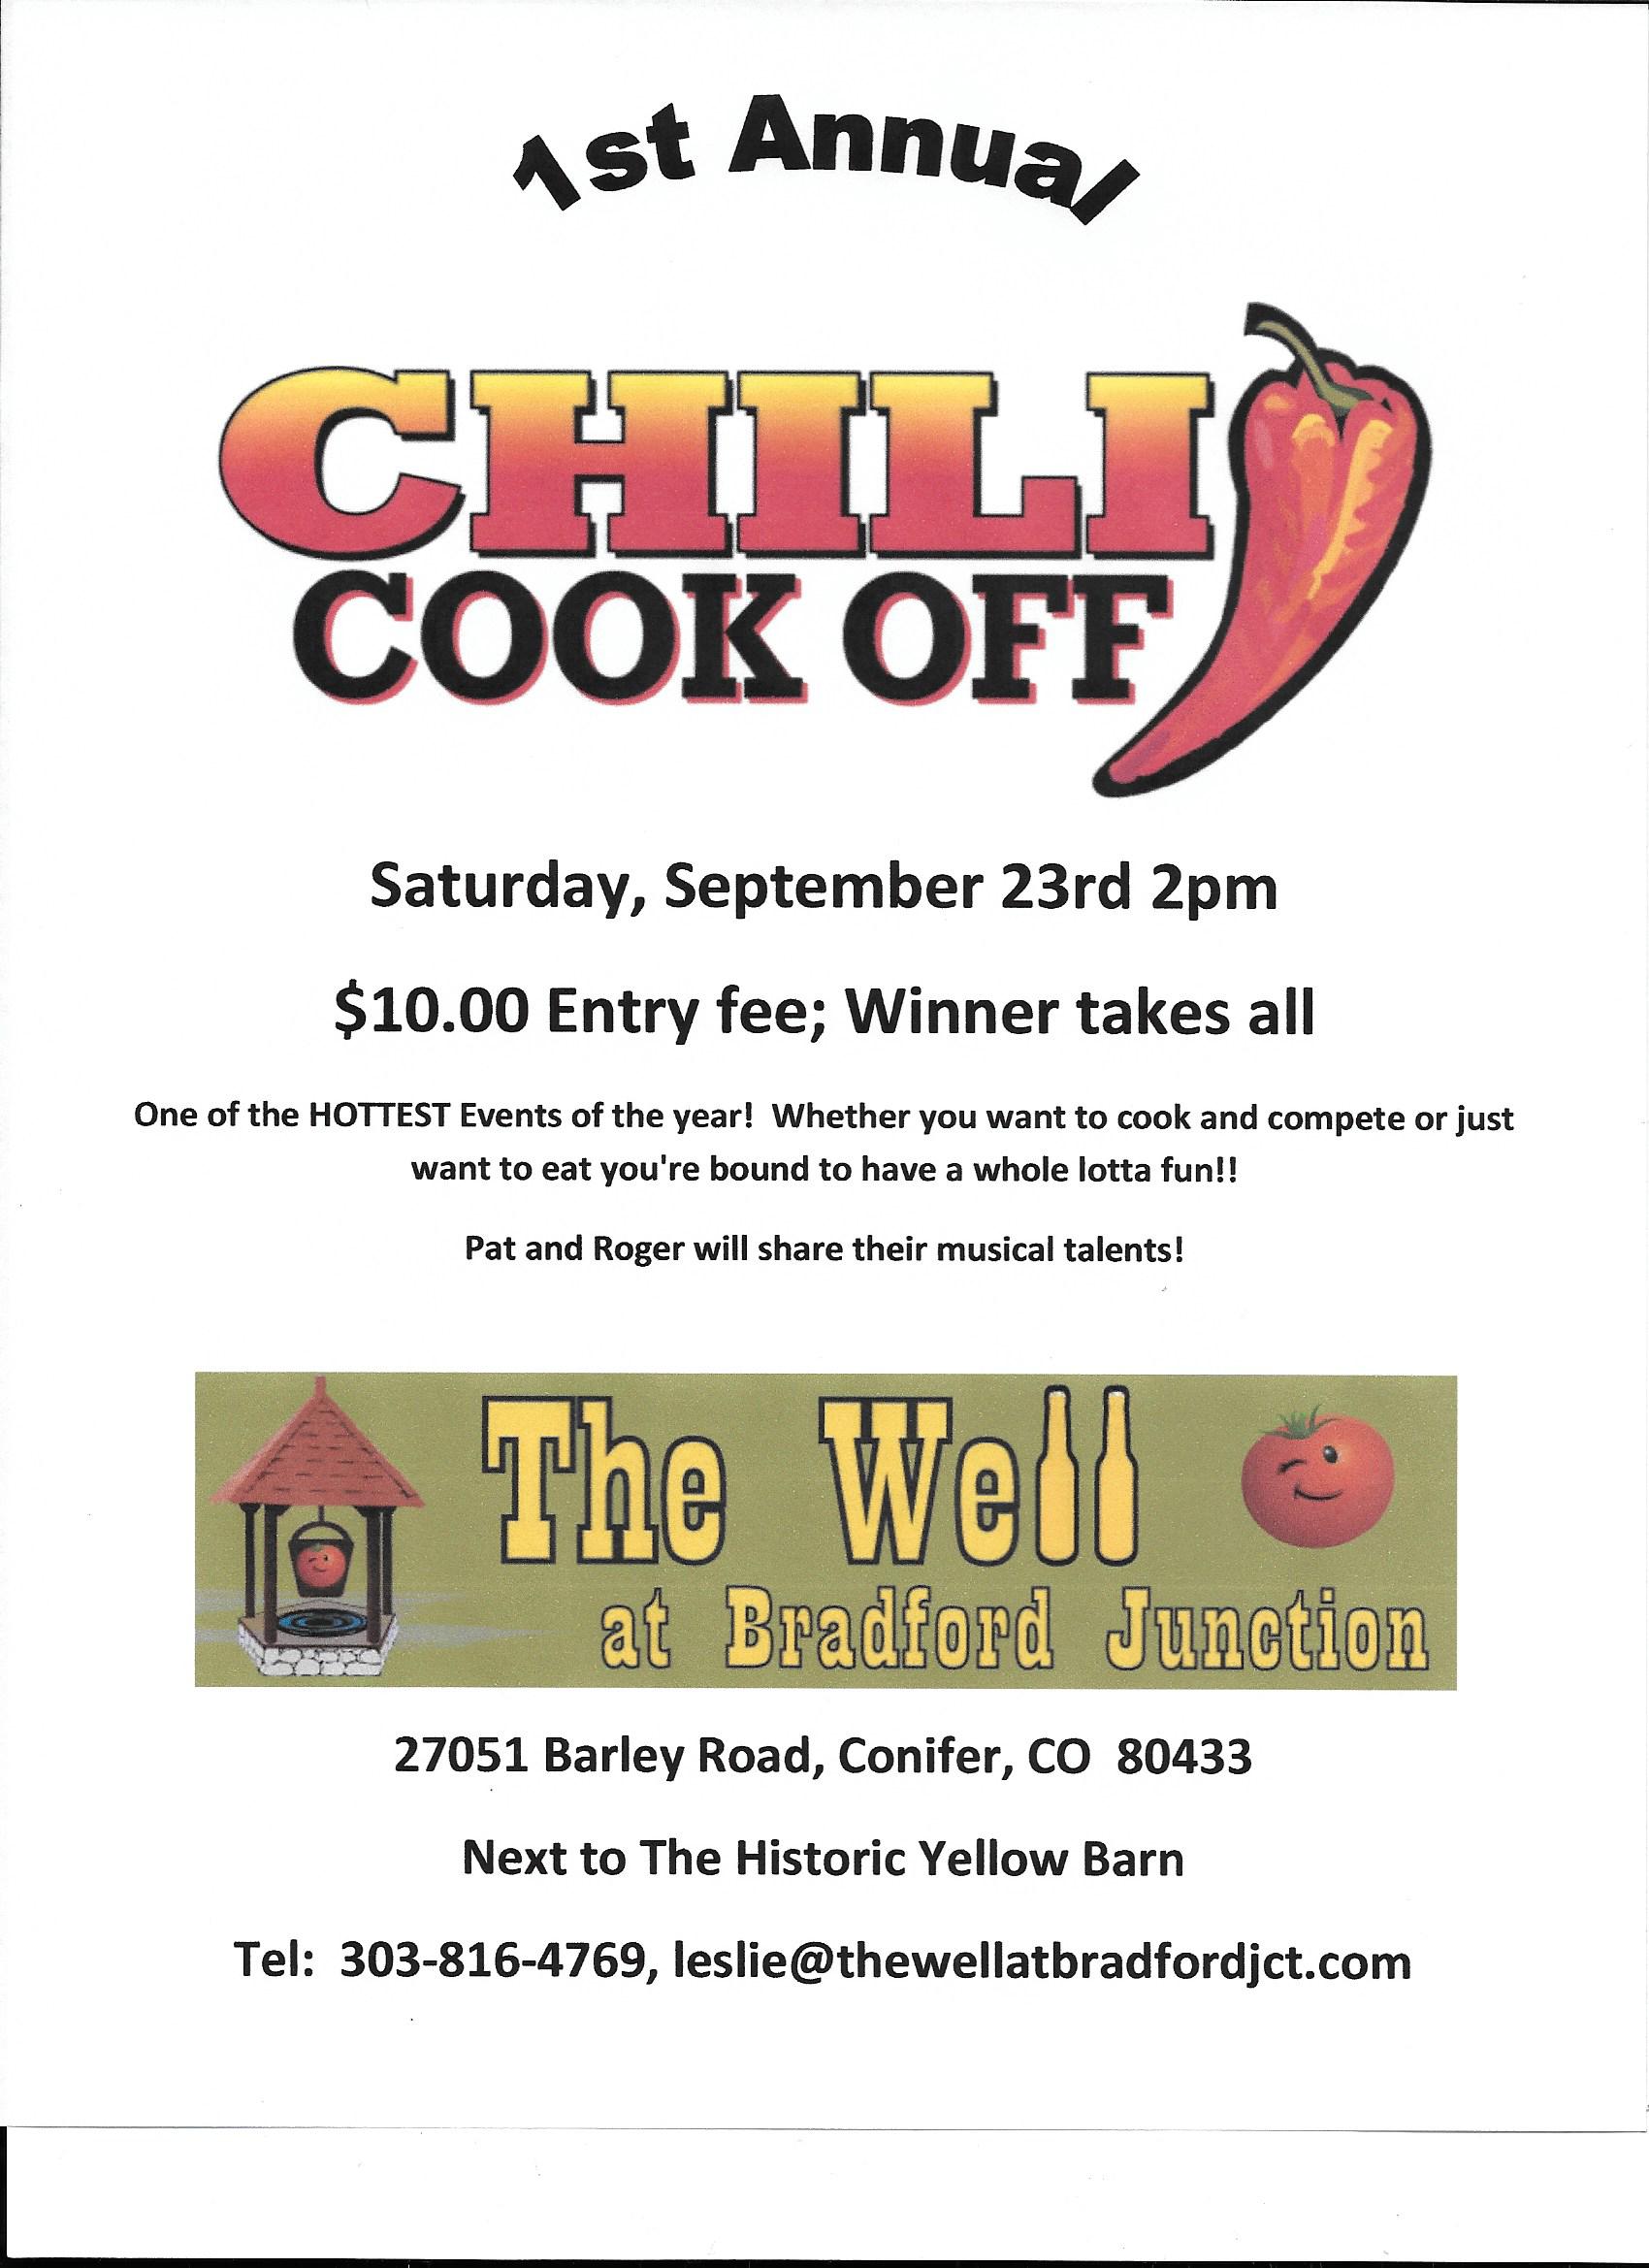 1st Annual Chili Cook off - The Well at Bradford Junction